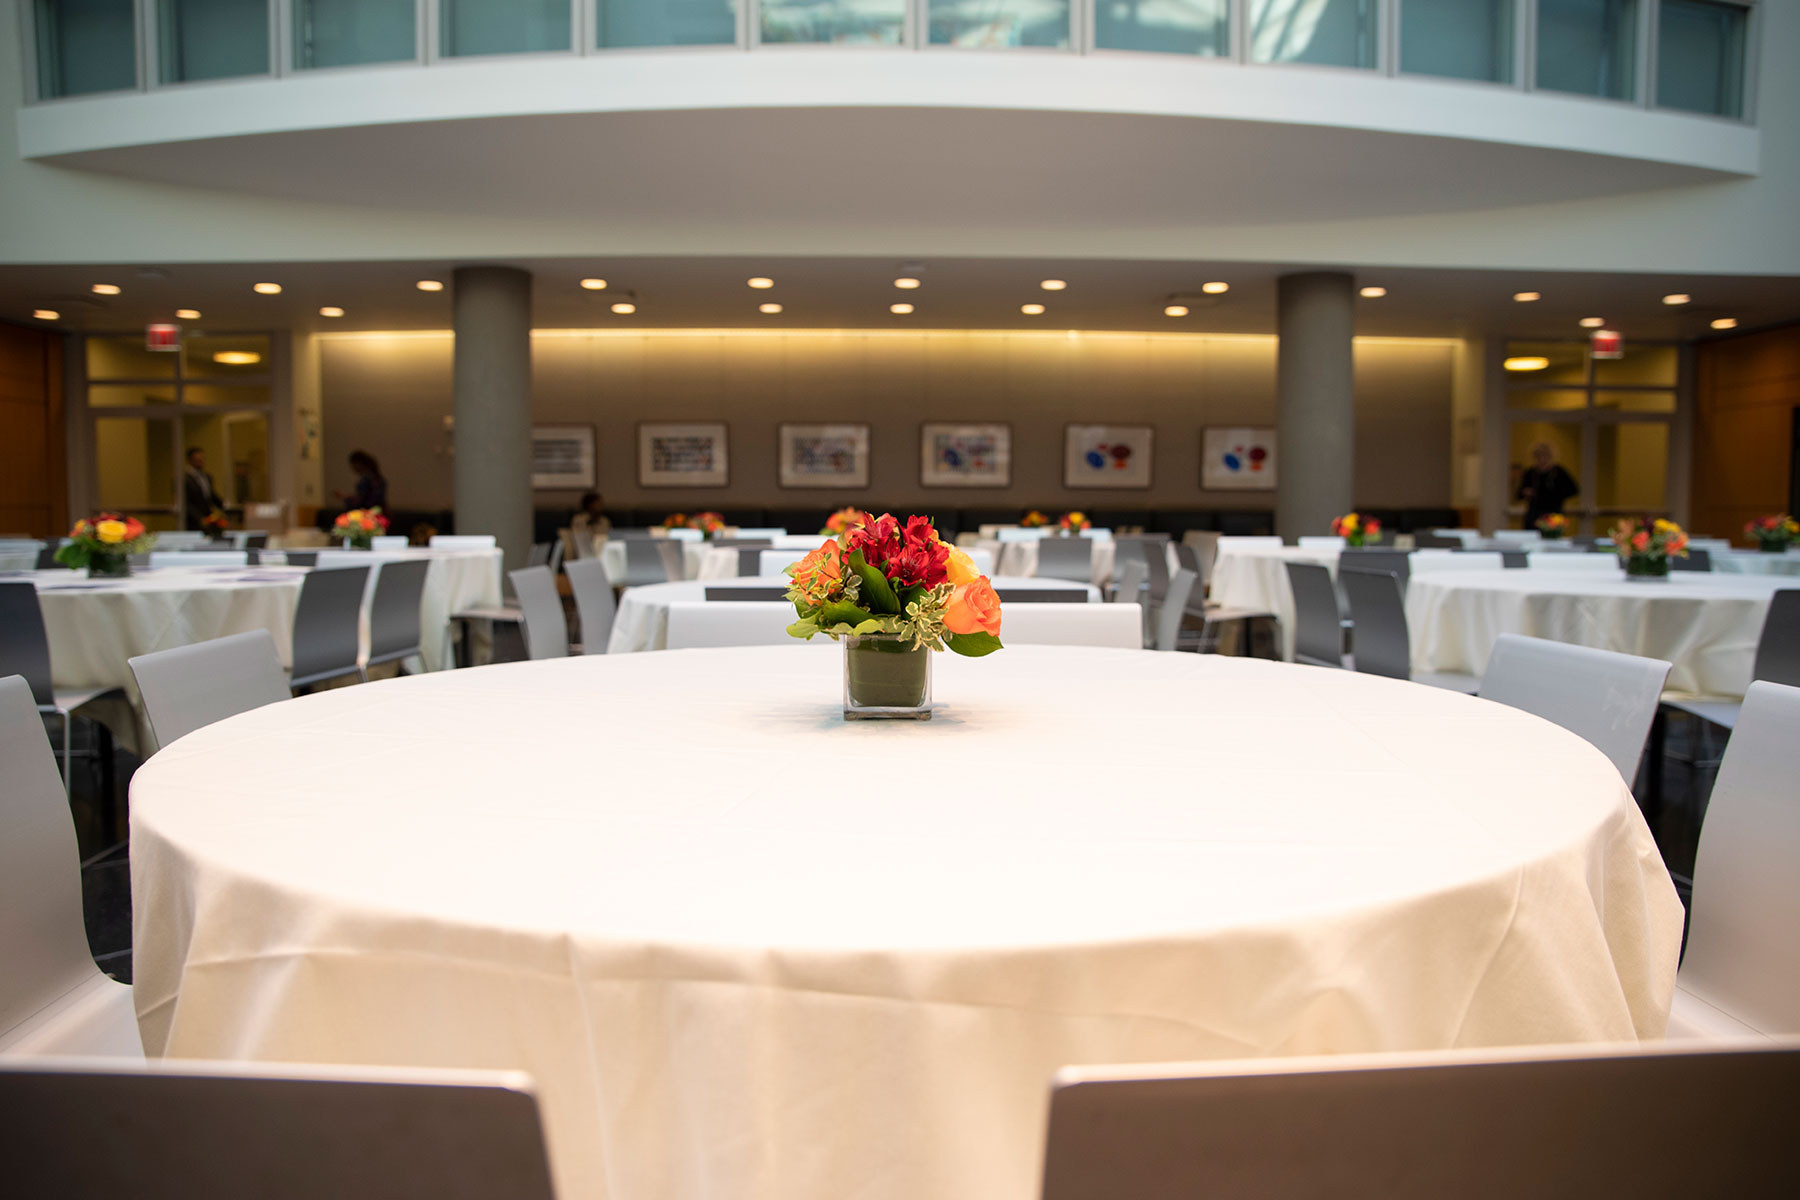 Dining Commons - Reception Space in NYC. Ideal for corporate receptions or private events.